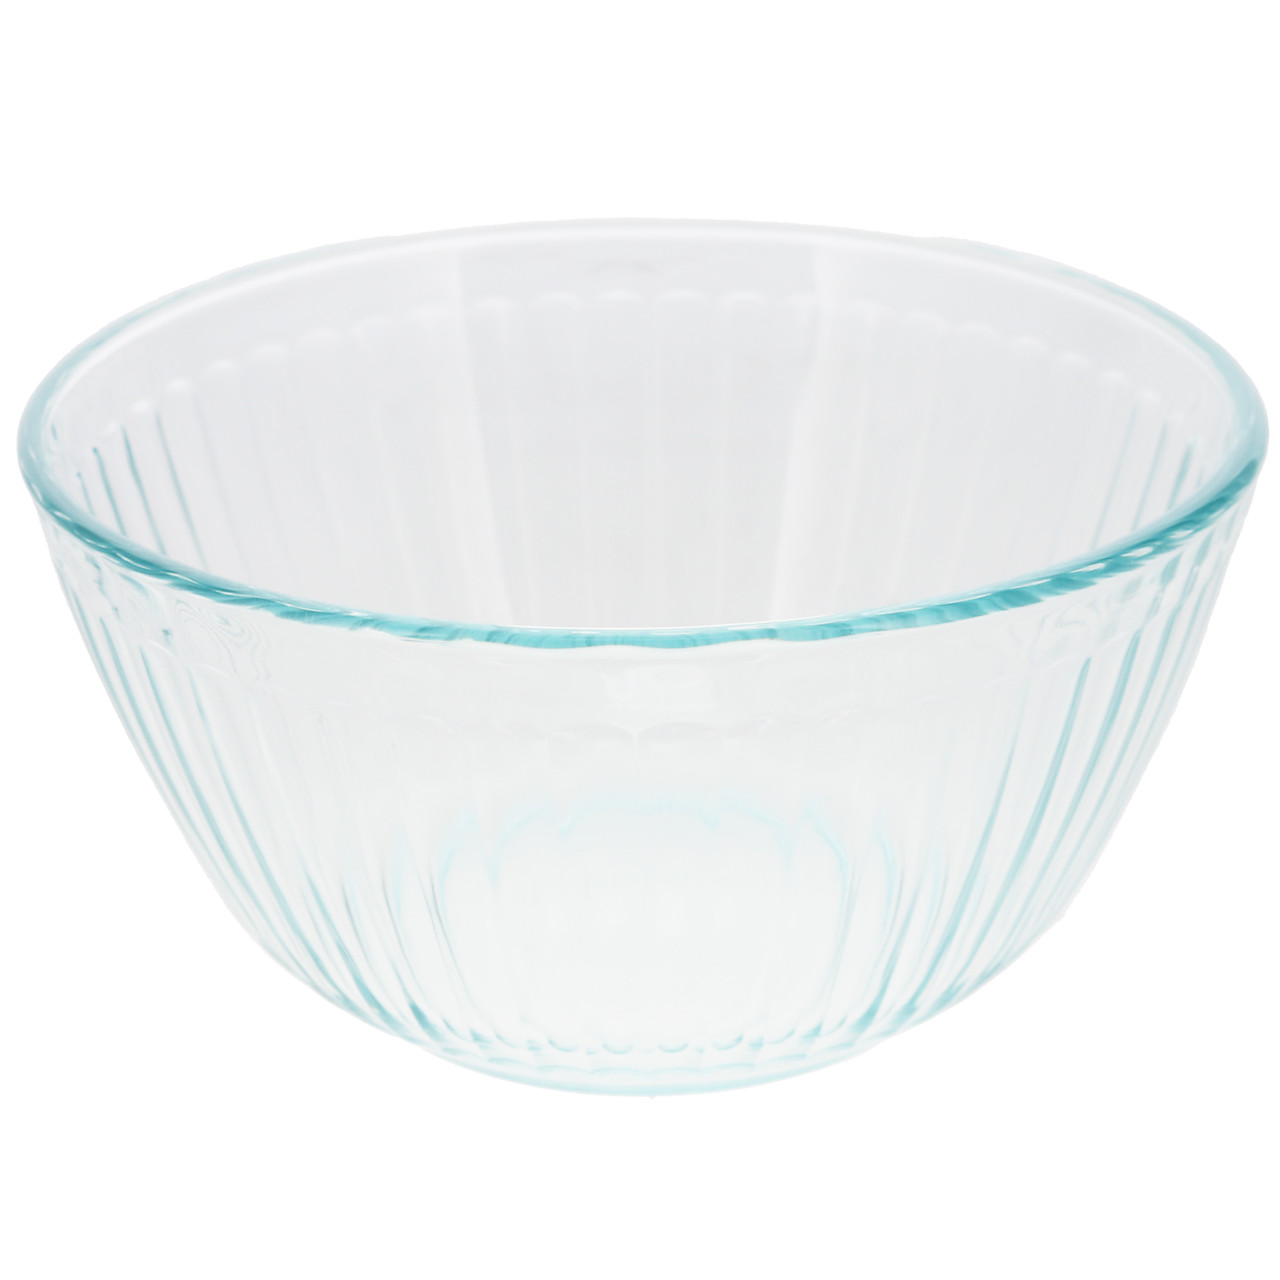 Pyrex (1) 7203 7-Cup Glass Food Storage Bowl and (1) 7402-PC Blue Spruce Plastic Lid, Clear